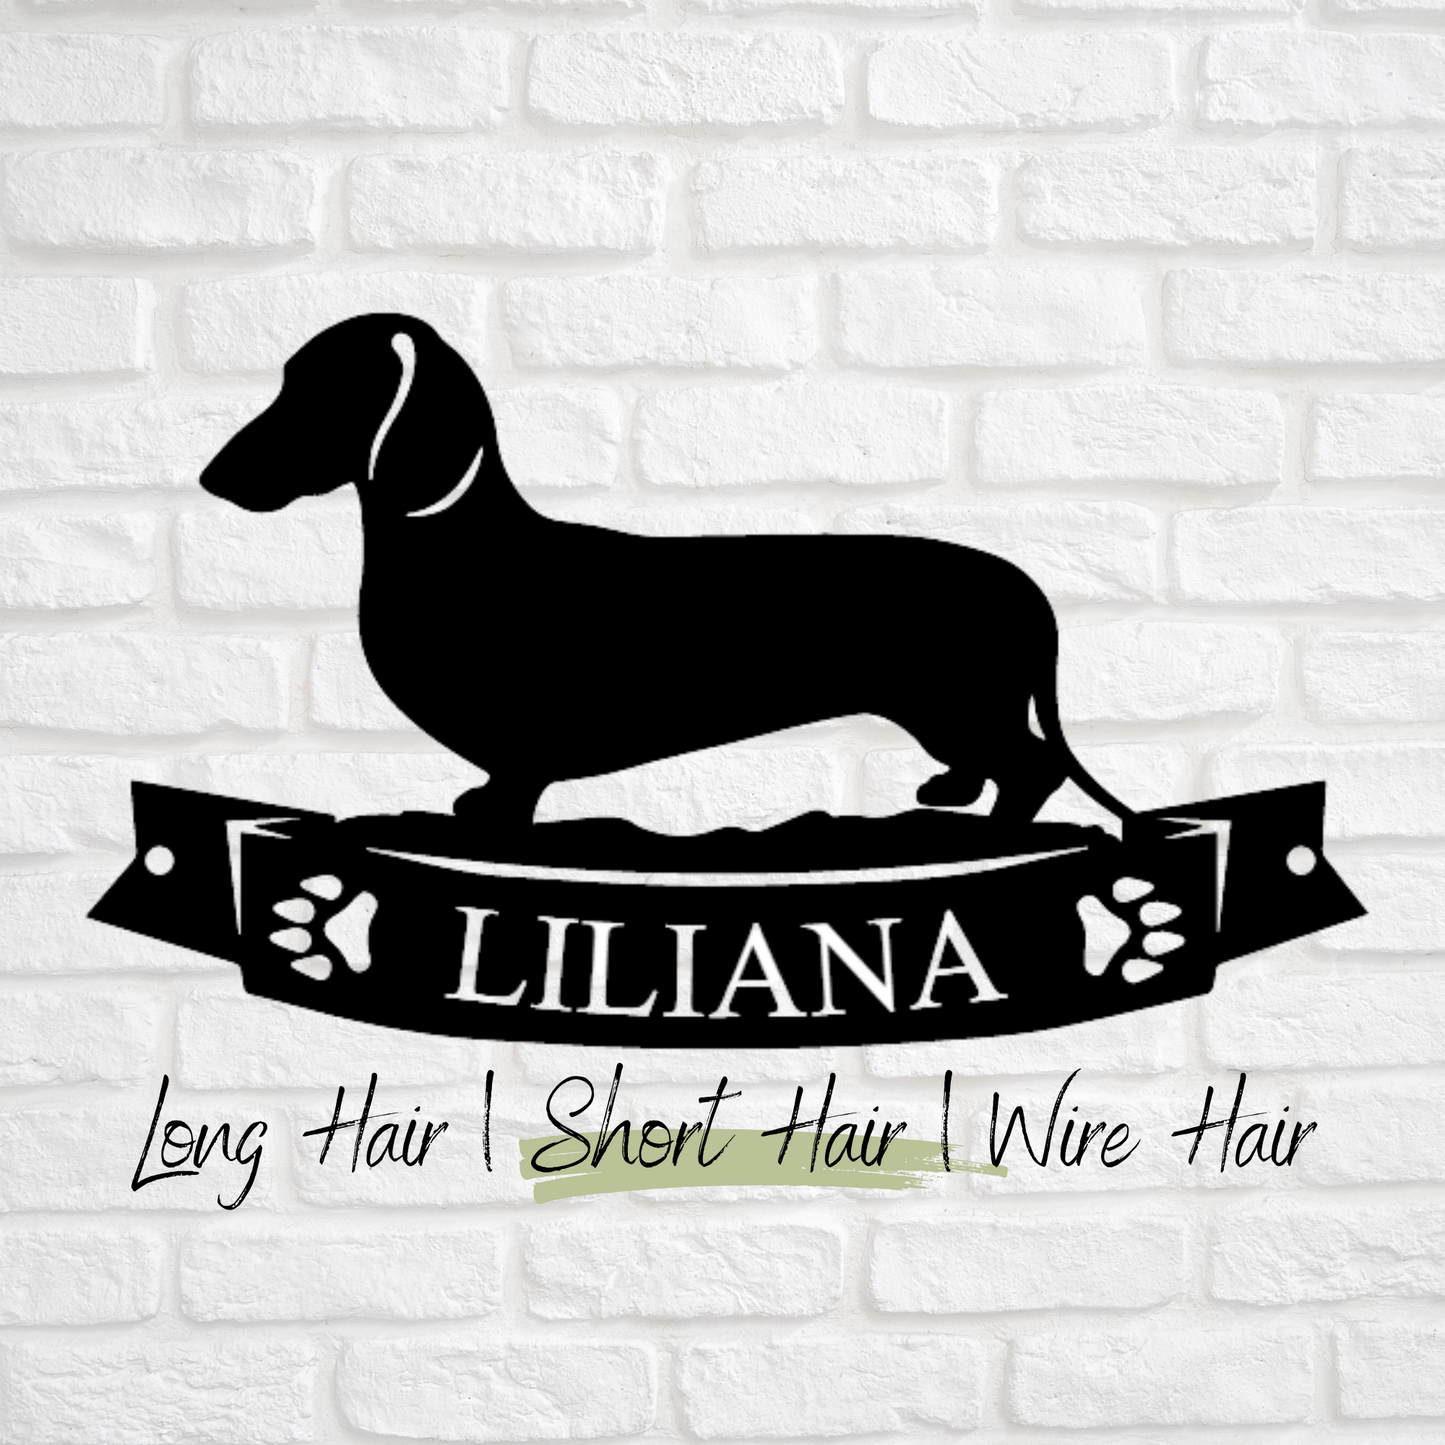 Dachshund Dog Sign with Paw Print Banner - Personalized Metal Sign - Short Hair, Long Hair, Wire Hair Versions Available